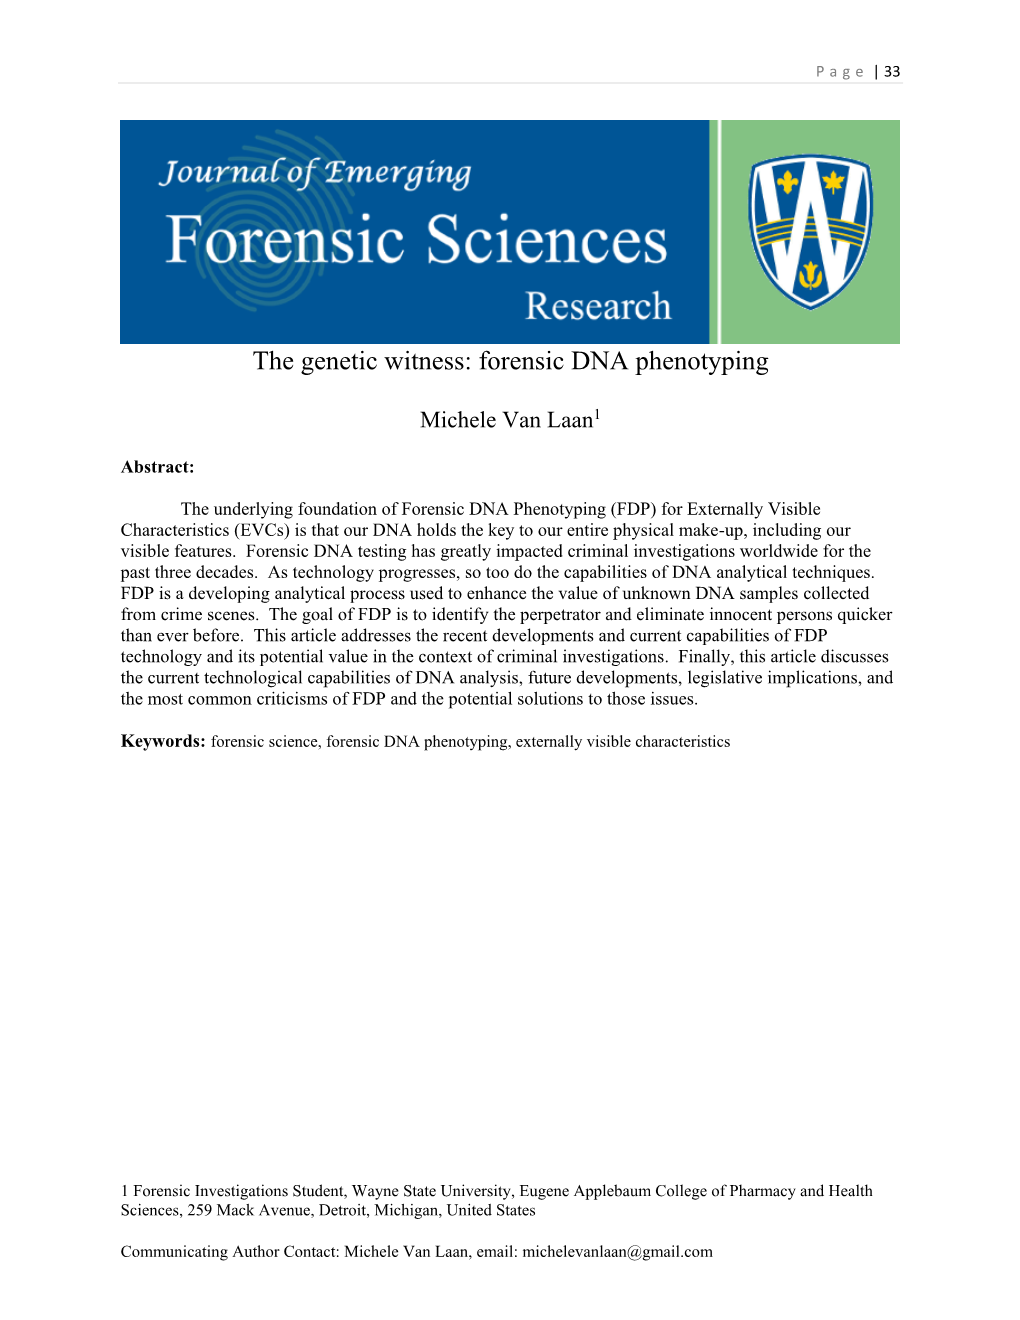 Forensic DNA Phenotyping